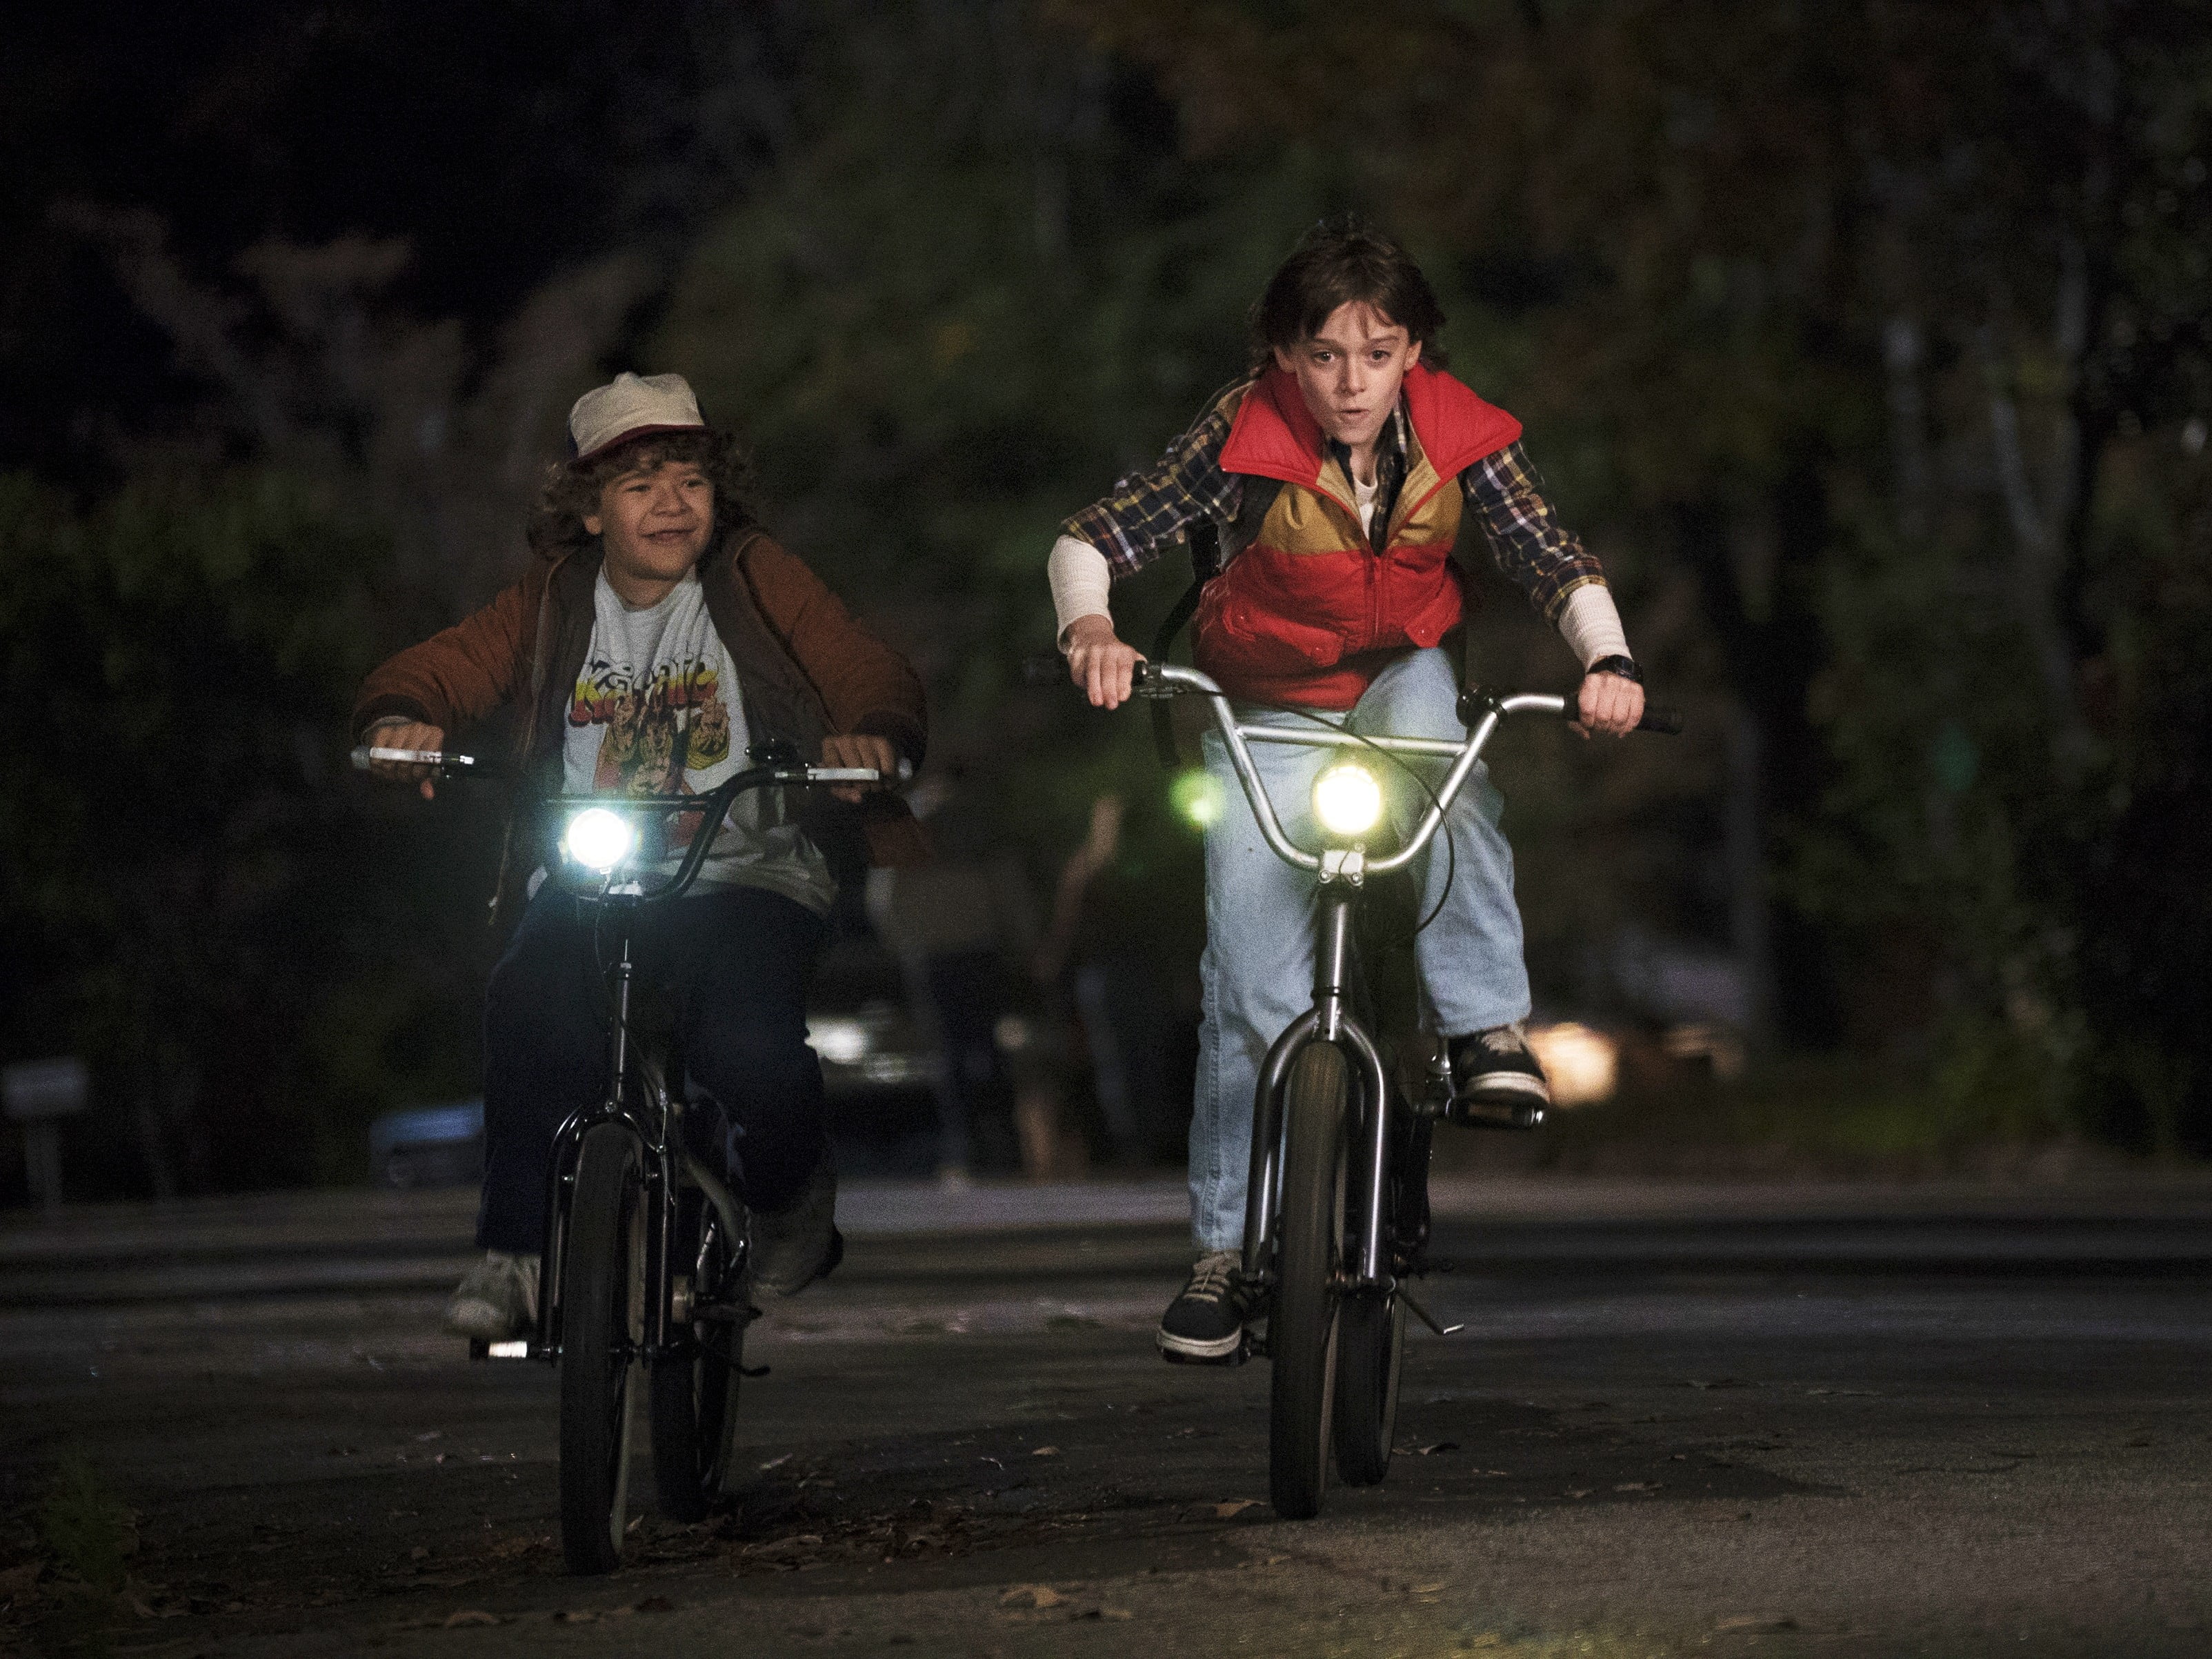 Download  Make journeys more exciting with the Stranger Things Bike  Wallpaper  Wallpaperscom